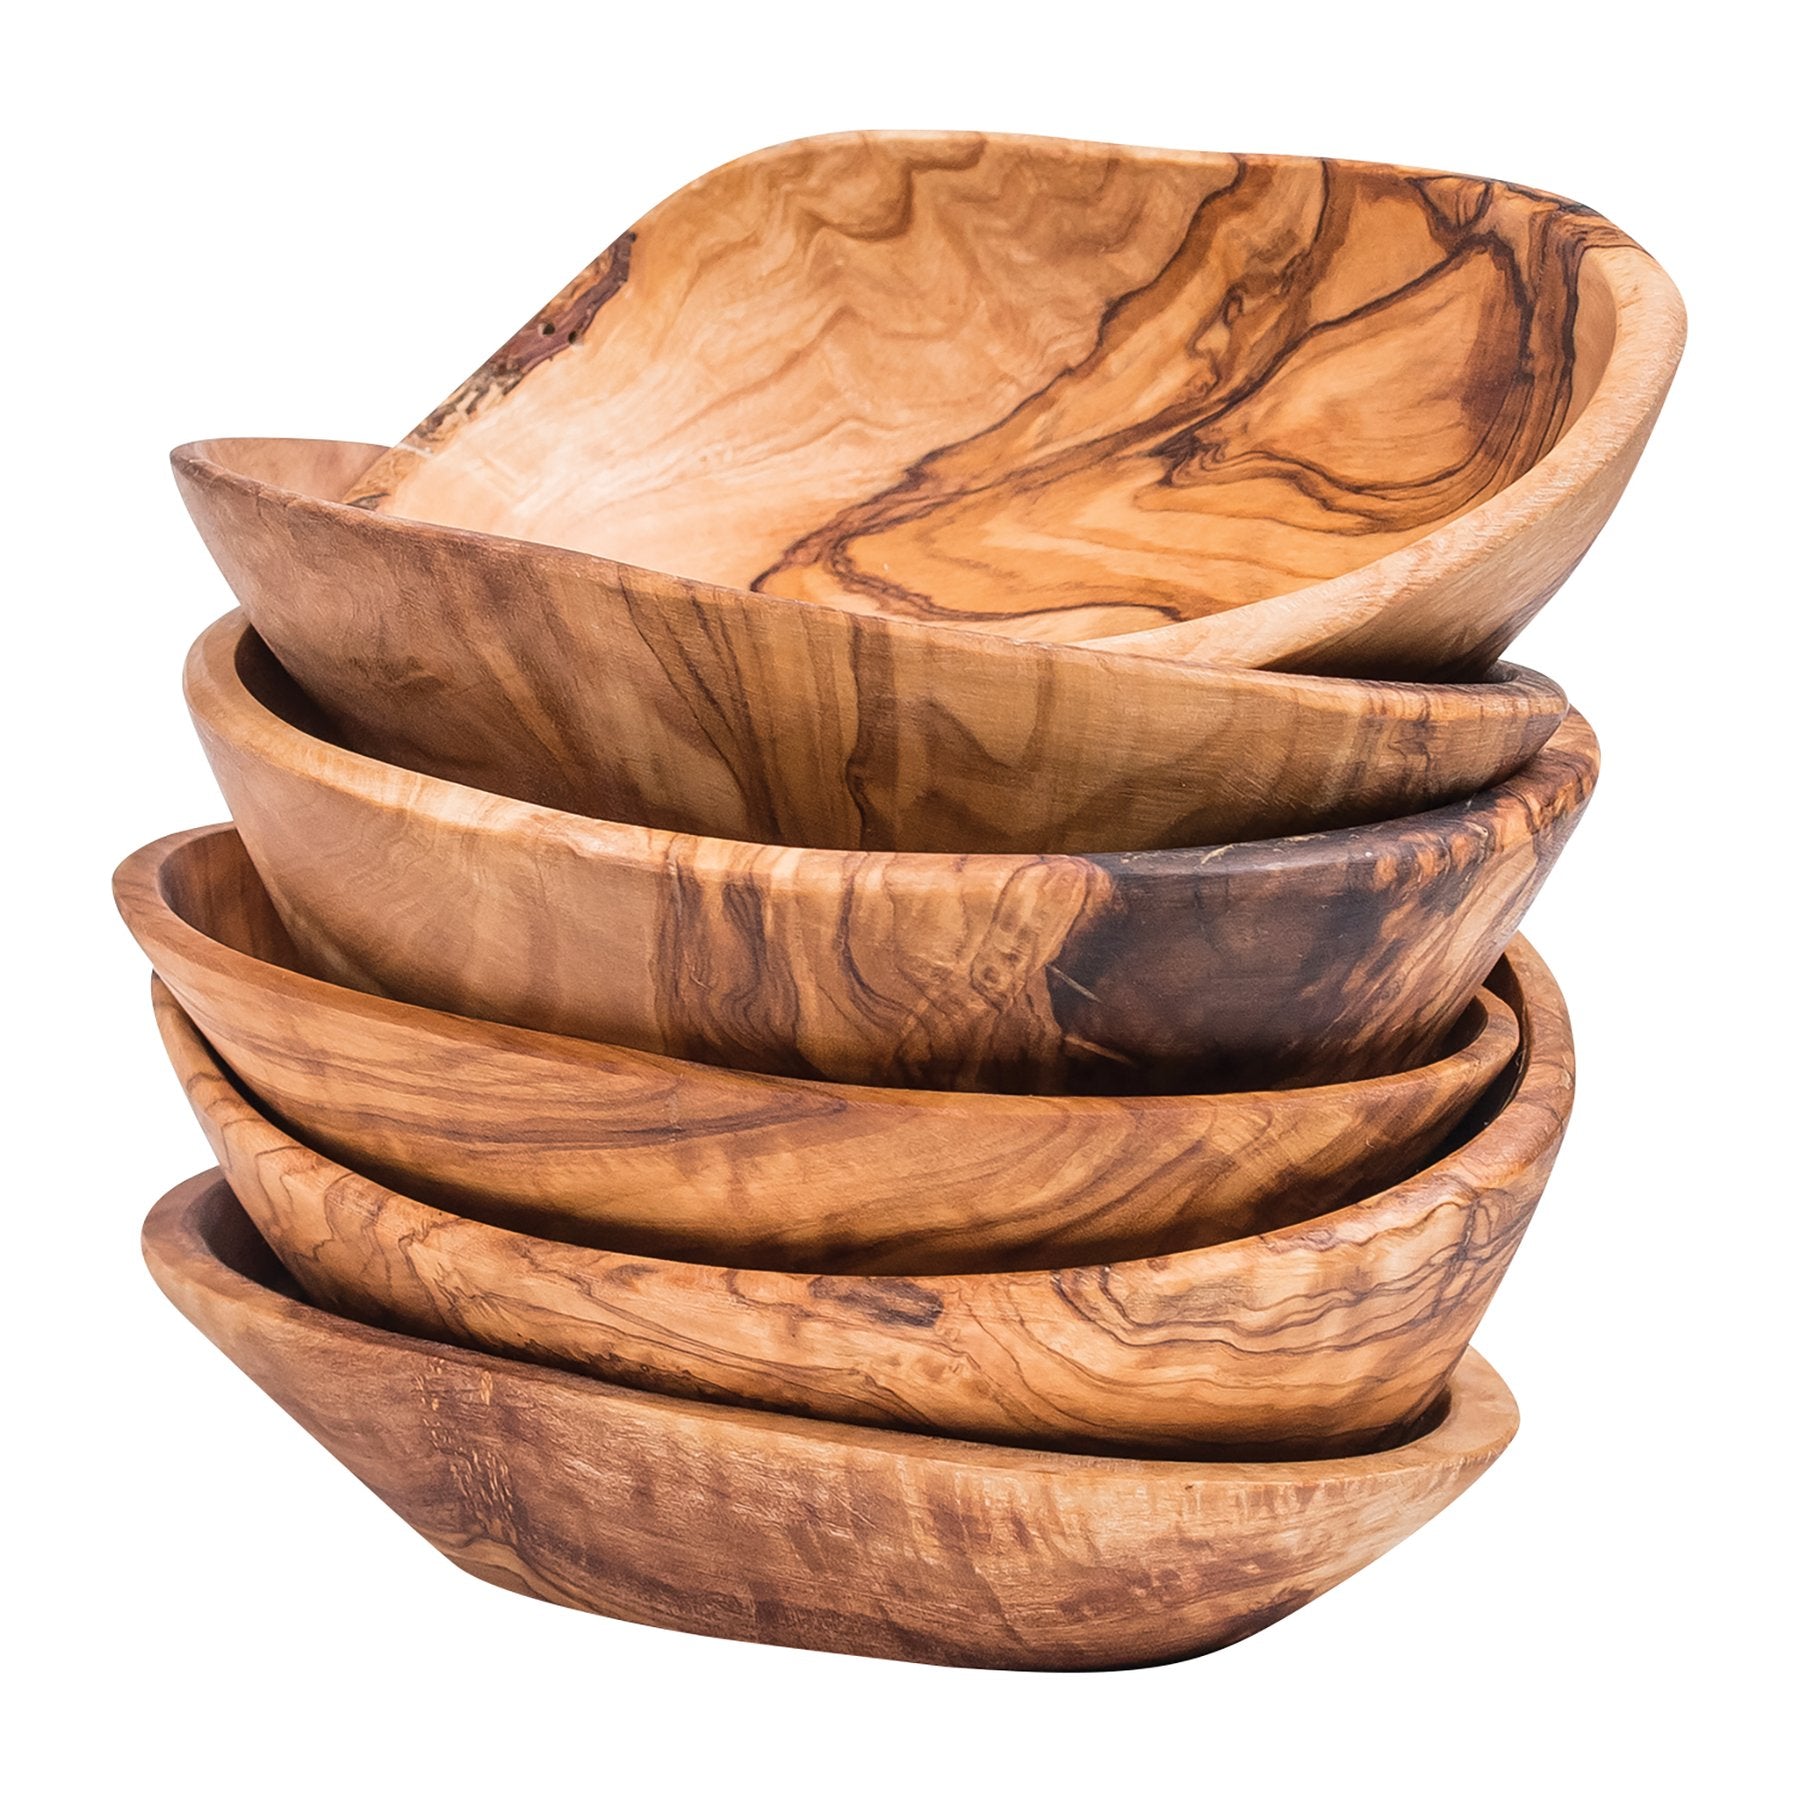 Hand Crafted Olive Wood Bowl Small | Petite Maison